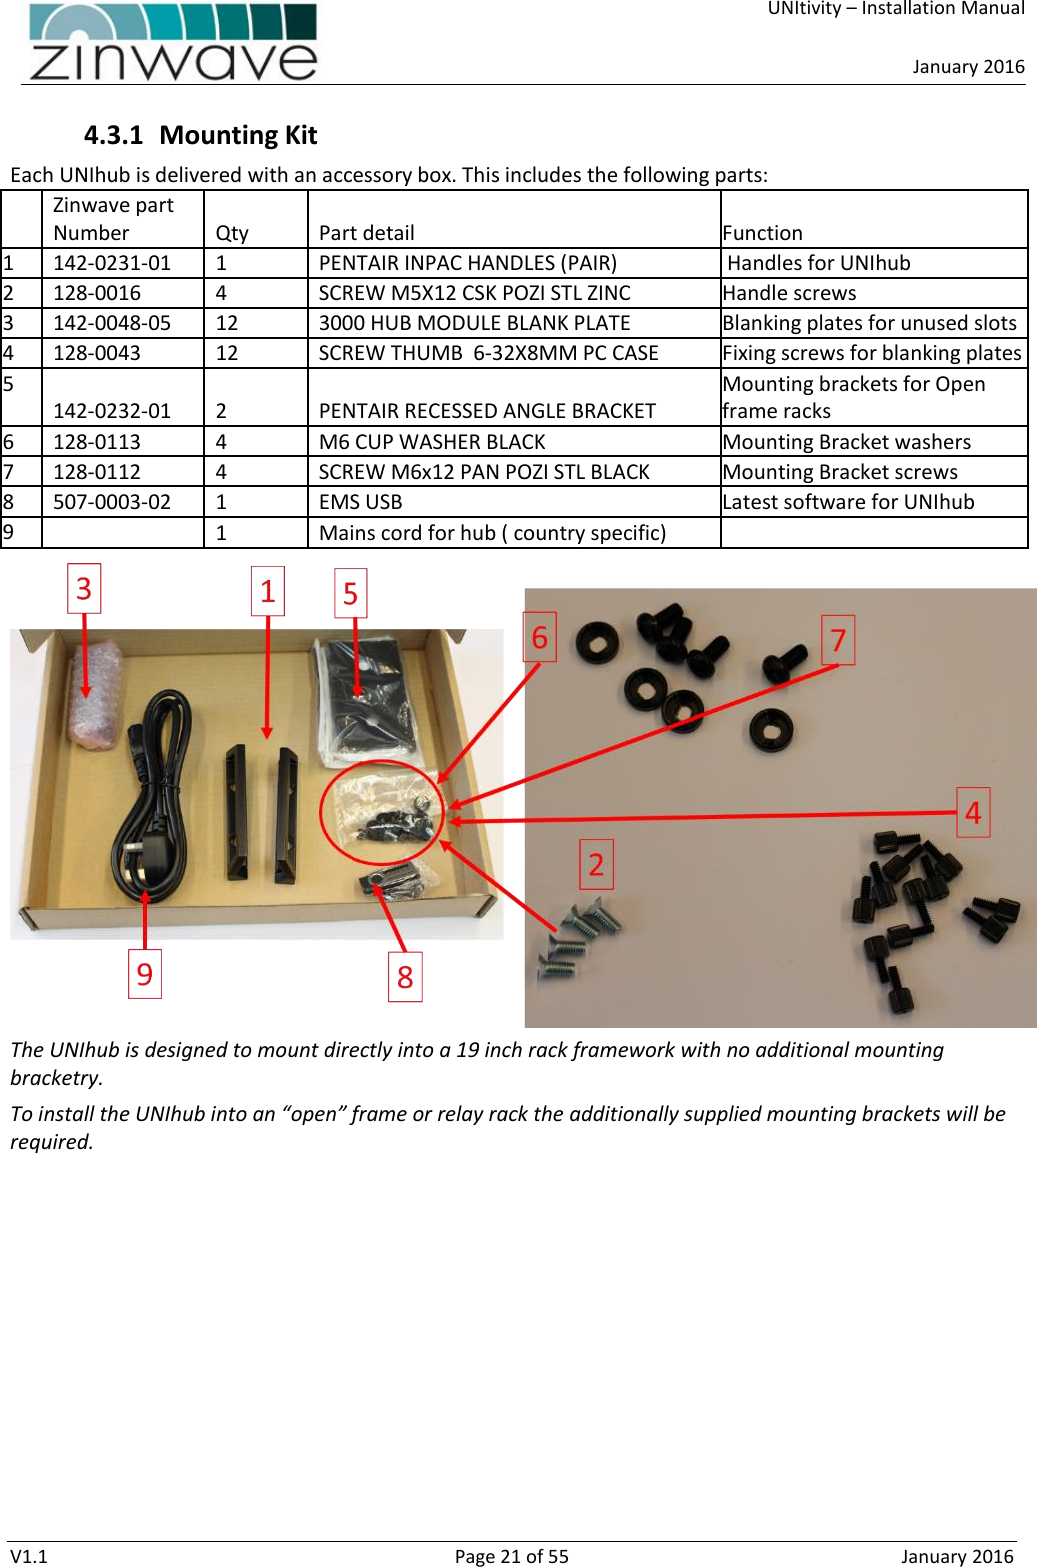     UNItivity – Installation Manual      January 2016  V1.1  Page 21 of 55  January 2016 4.3.1 Mounting Kit Each UNIhub is delivered with an accessory box. This includes the following parts:  Zinwave part Number Qty Part detail Function 1 142-0231-01 1 PENTAIR INPAC HANDLES (PAIR)  Handles for UNIhub 2 128-0016 4 SCREW M5X12 CSK POZI STL ZINC Handle screws 3 142-0048-05 12 3000 HUB MODULE BLANK PLATE Blanking plates for unused slots 4 128-0043 12 SCREW THUMB  6-32X8MM PC CASE Fixing screws for blanking plates 5 142-0232-01 2 PENTAIR RECESSED ANGLE BRACKET Mounting brackets for Open frame racks 6 128-0113 4 M6 CUP WASHER BLACK Mounting Bracket washers 7 128-0112 4 SCREW M6x12 PAN POZI STL BLACK Mounting Bracket screws 8 507-0003-02 1 EMS USB Latest software for UNIhub 9  1 Mains cord for hub ( country specific)   The UNIhub is designed to mount directly into a 19 inch rack framework with no additional mounting bracketry. To install the UNIhub into an “open” frame or relay rack the additionally supplied mounting brackets will be required.    